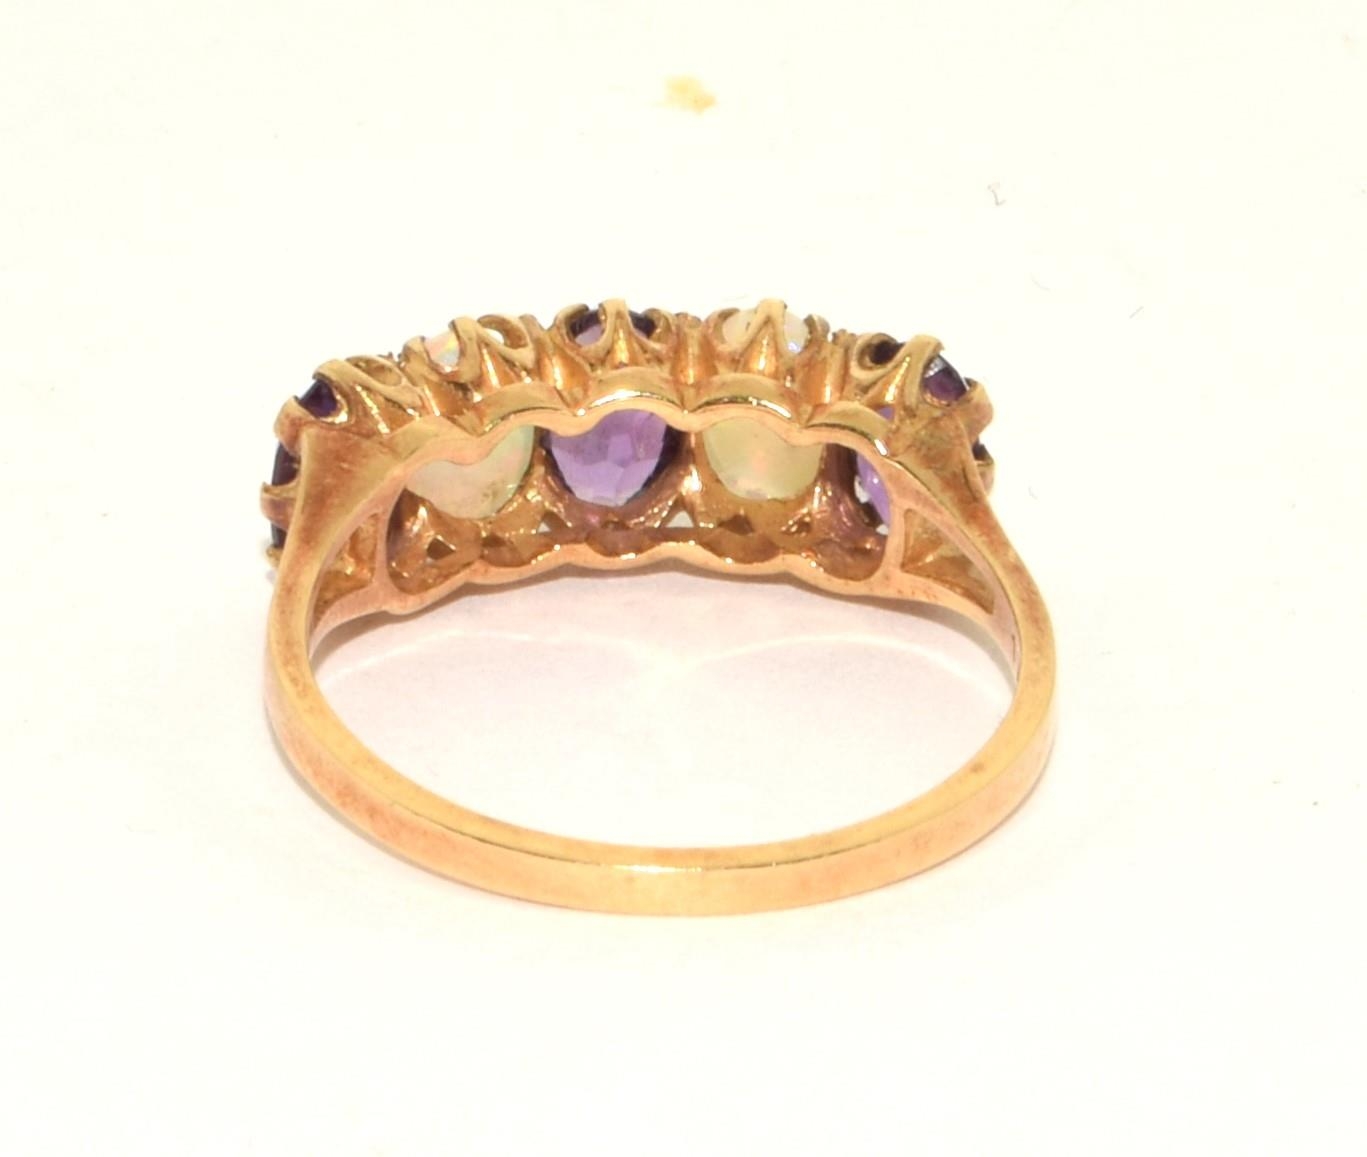 9ct gold Antique set Opal and Amethyst 5 stone ring size O - Image 3 of 5